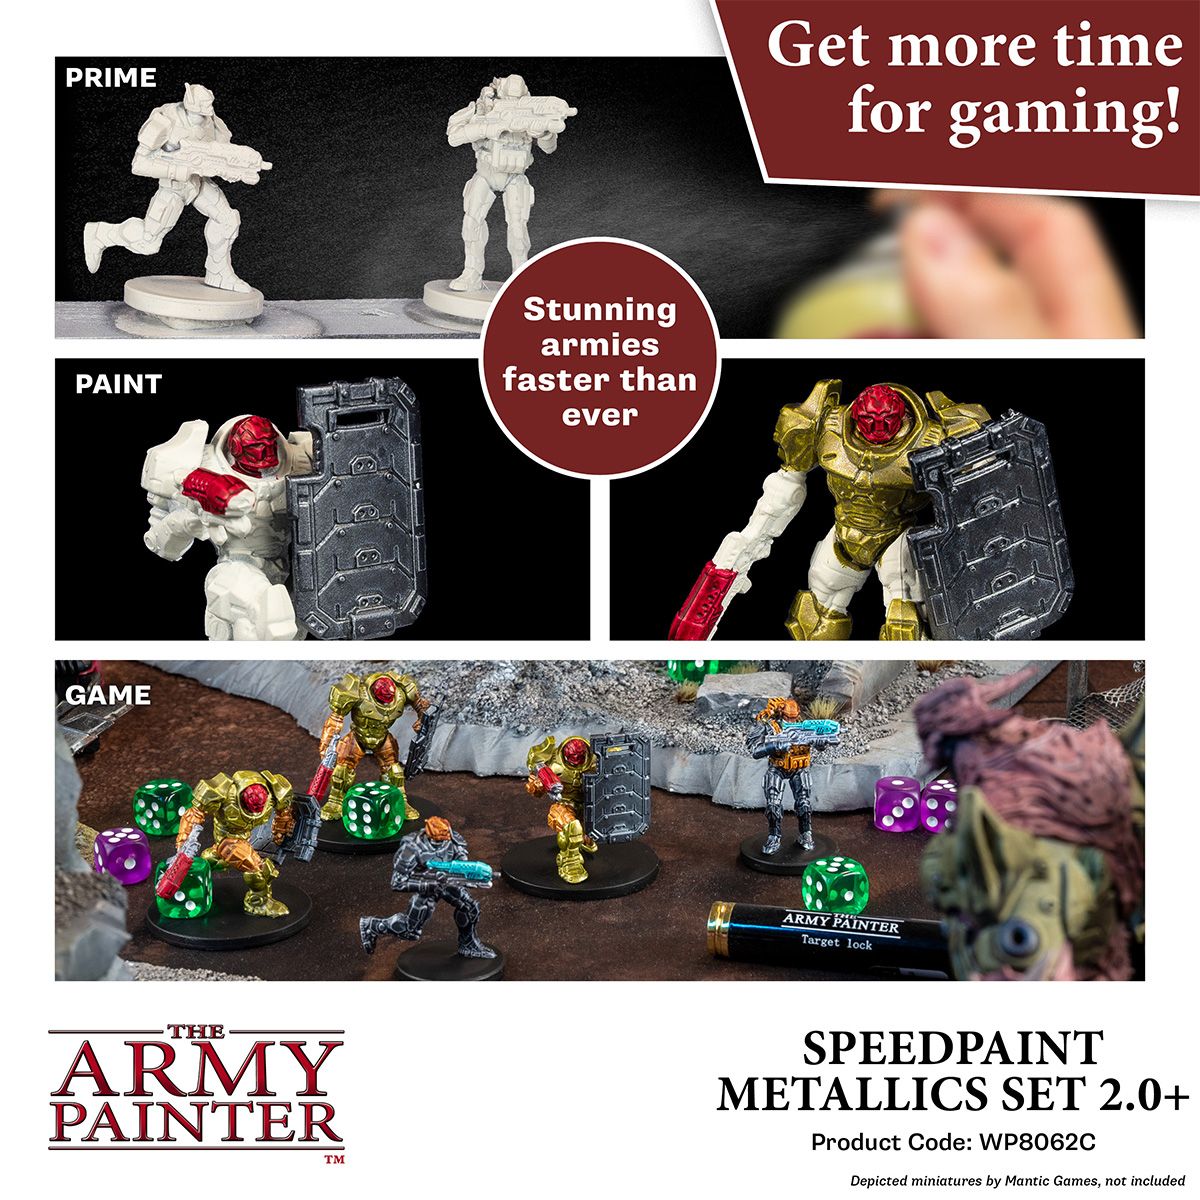 Everything You Need to Know About New Army Painter Speedpaint 2.0